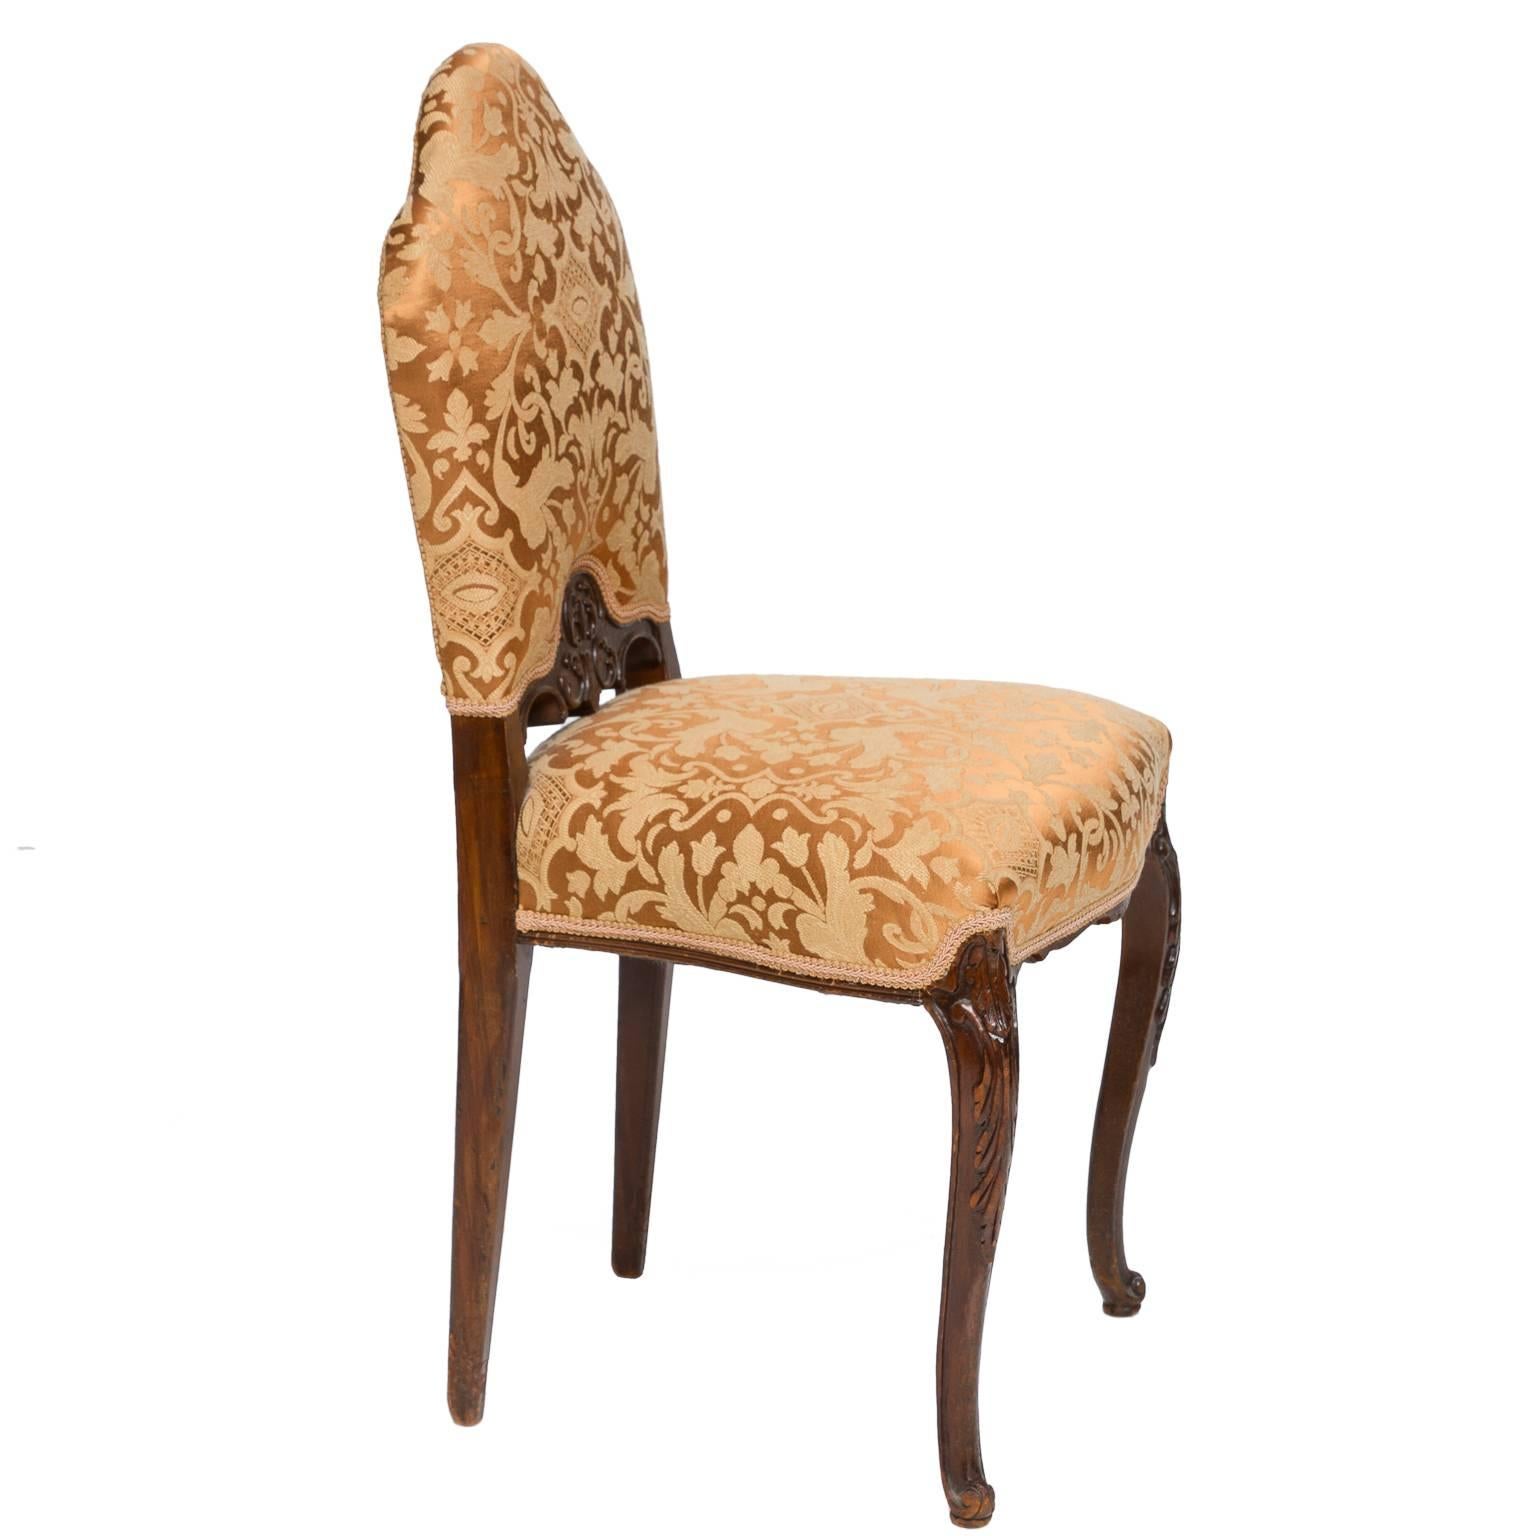 A delightful Louis XV style walnut vanity chair. Wonderful shaped back, notice the panel carved between the supports. Carved cabriole legs. Recent covering in a vintage style fabric. Very sturdy.